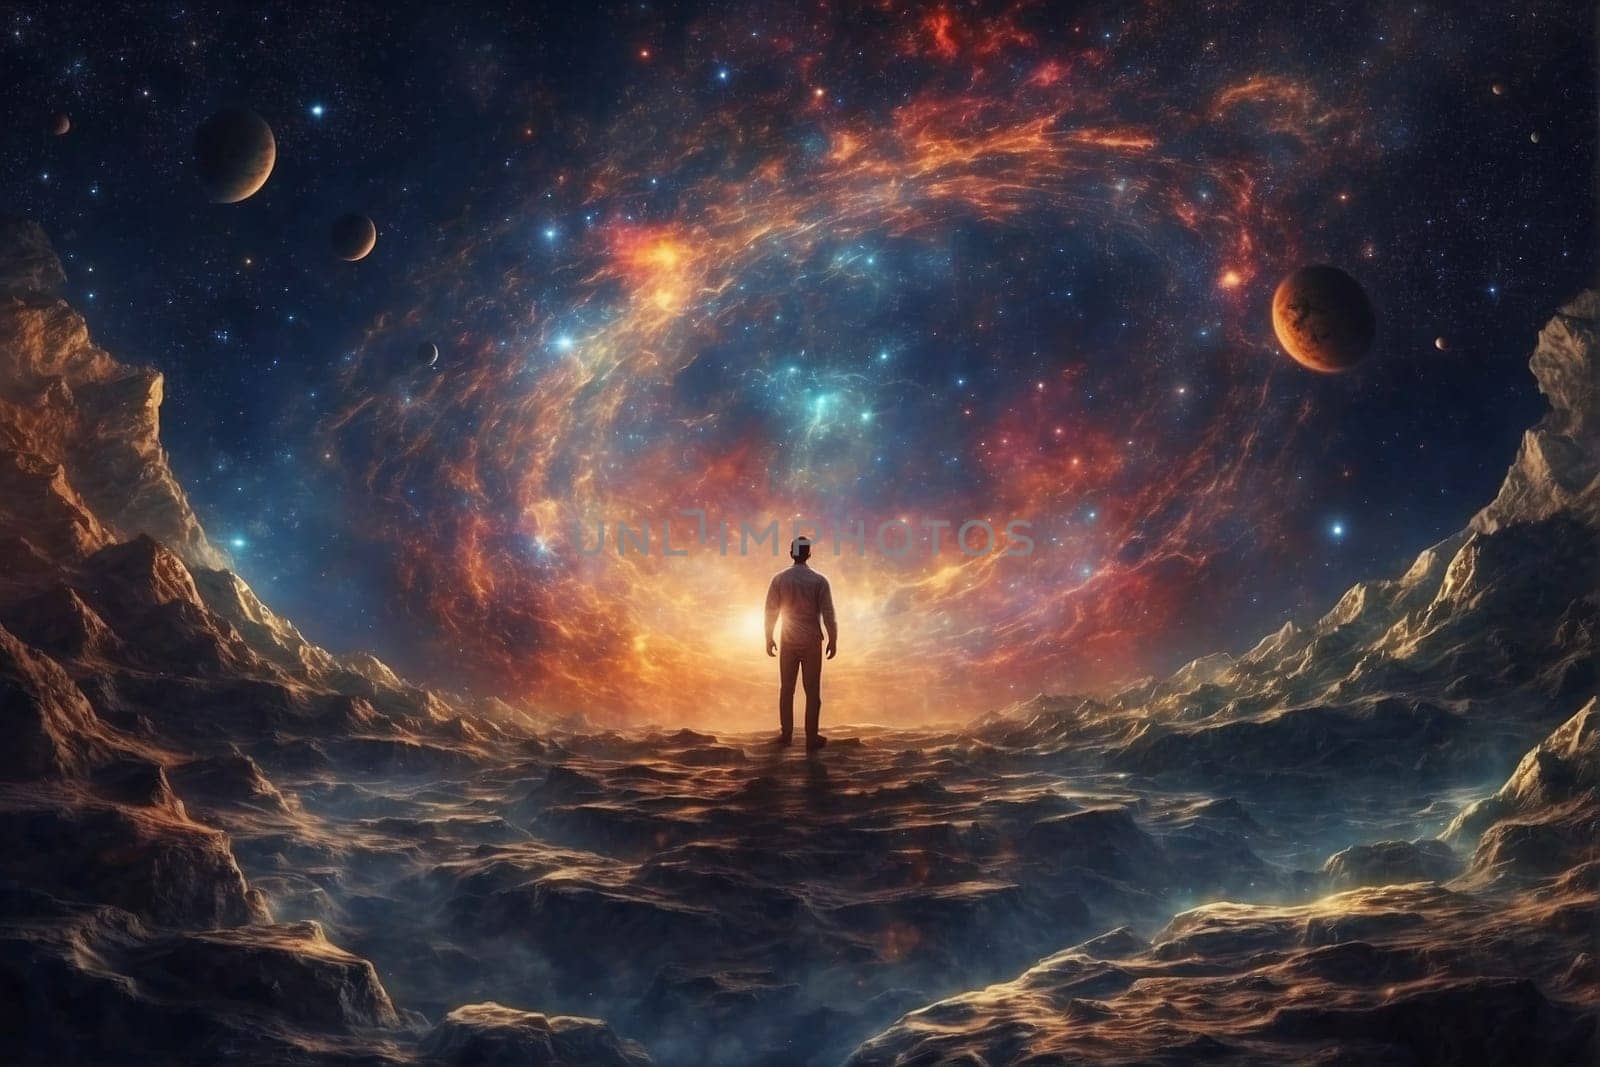 A man stands in the middle of a vast space filled with stars, exploring the universe.